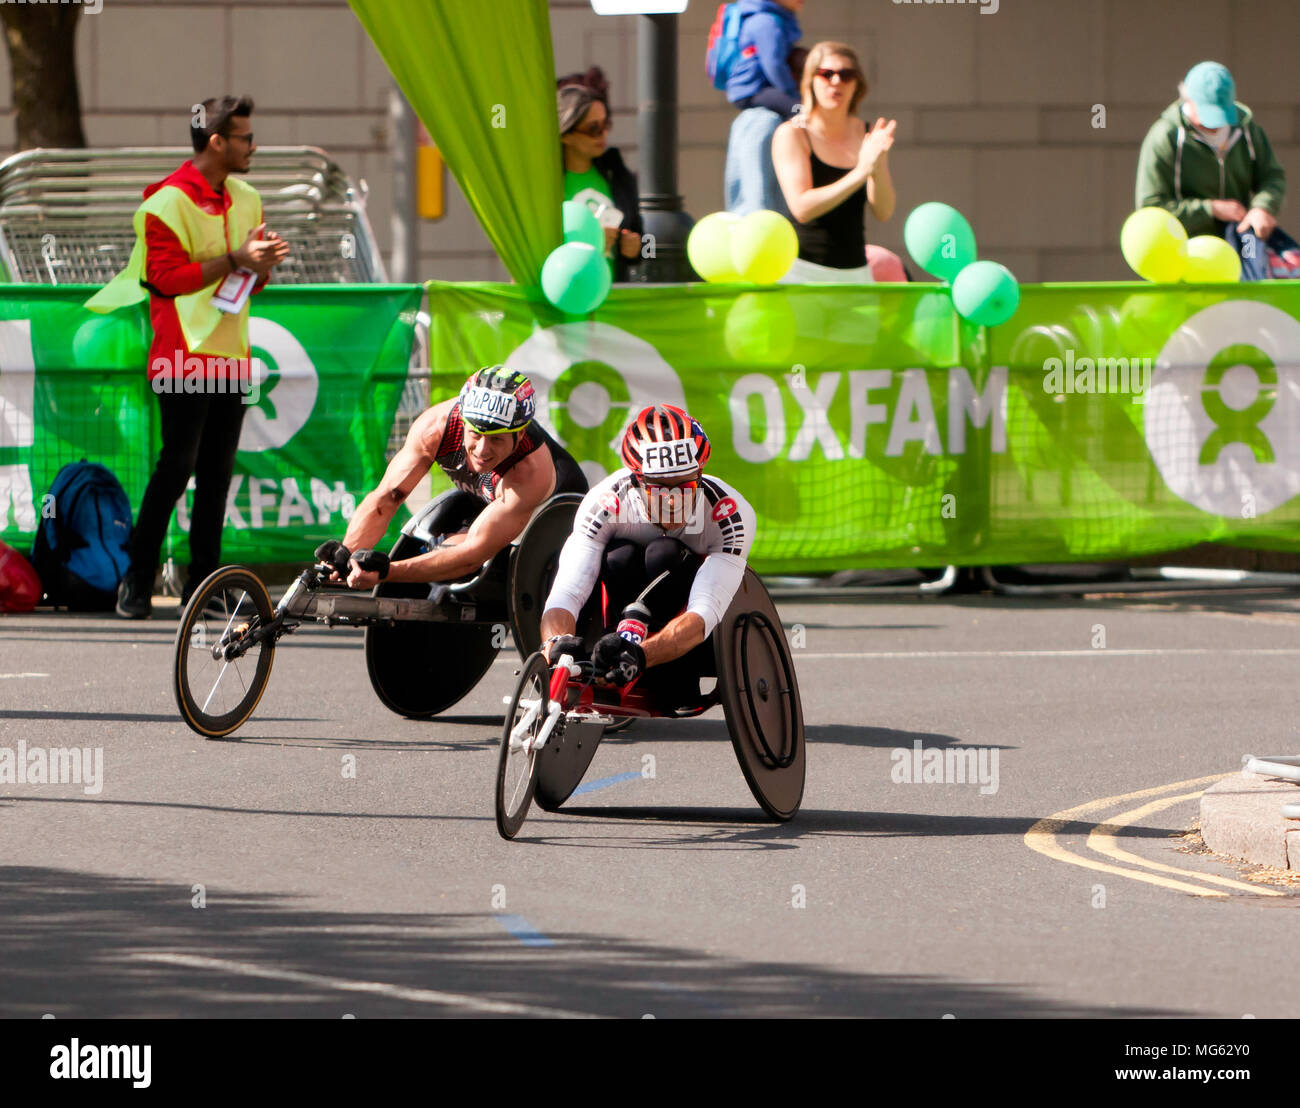 Heinz  Frie  and  Alexandre DuPont  fighting for position  at Cabot Square, during the 2018 London Marathon Stock Photo